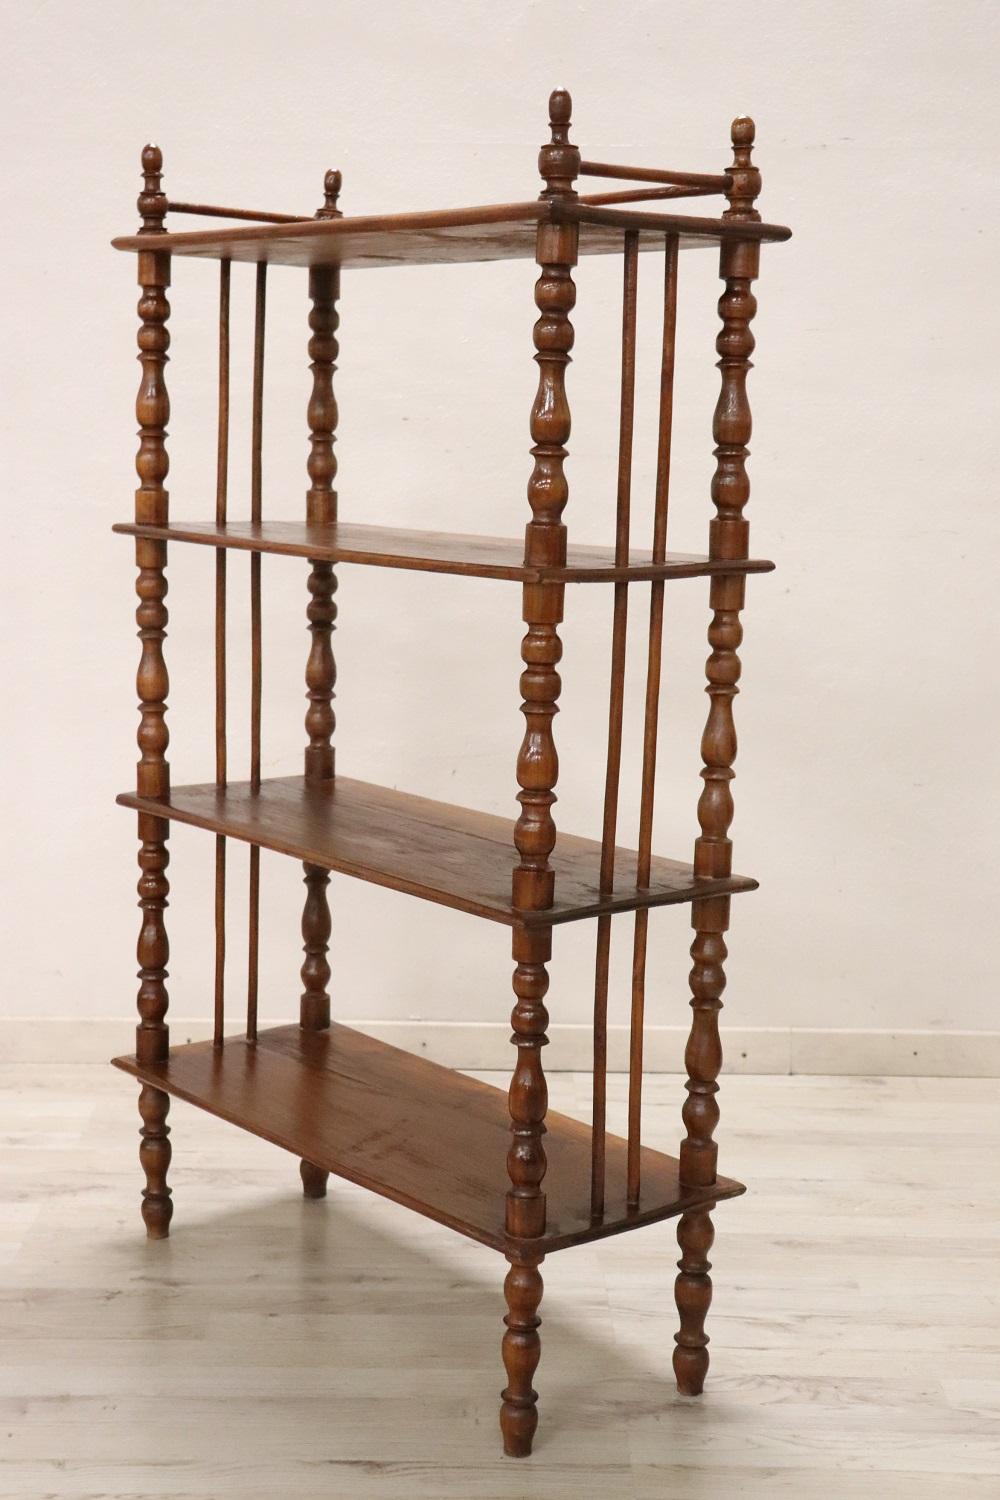 19th century of the period Louis Philippe italian antique étagère. Made in usual solid chestnut wood and characterized by refined turned columns. Equipped with four shelves available to display your objects or books. The distance between the shelves